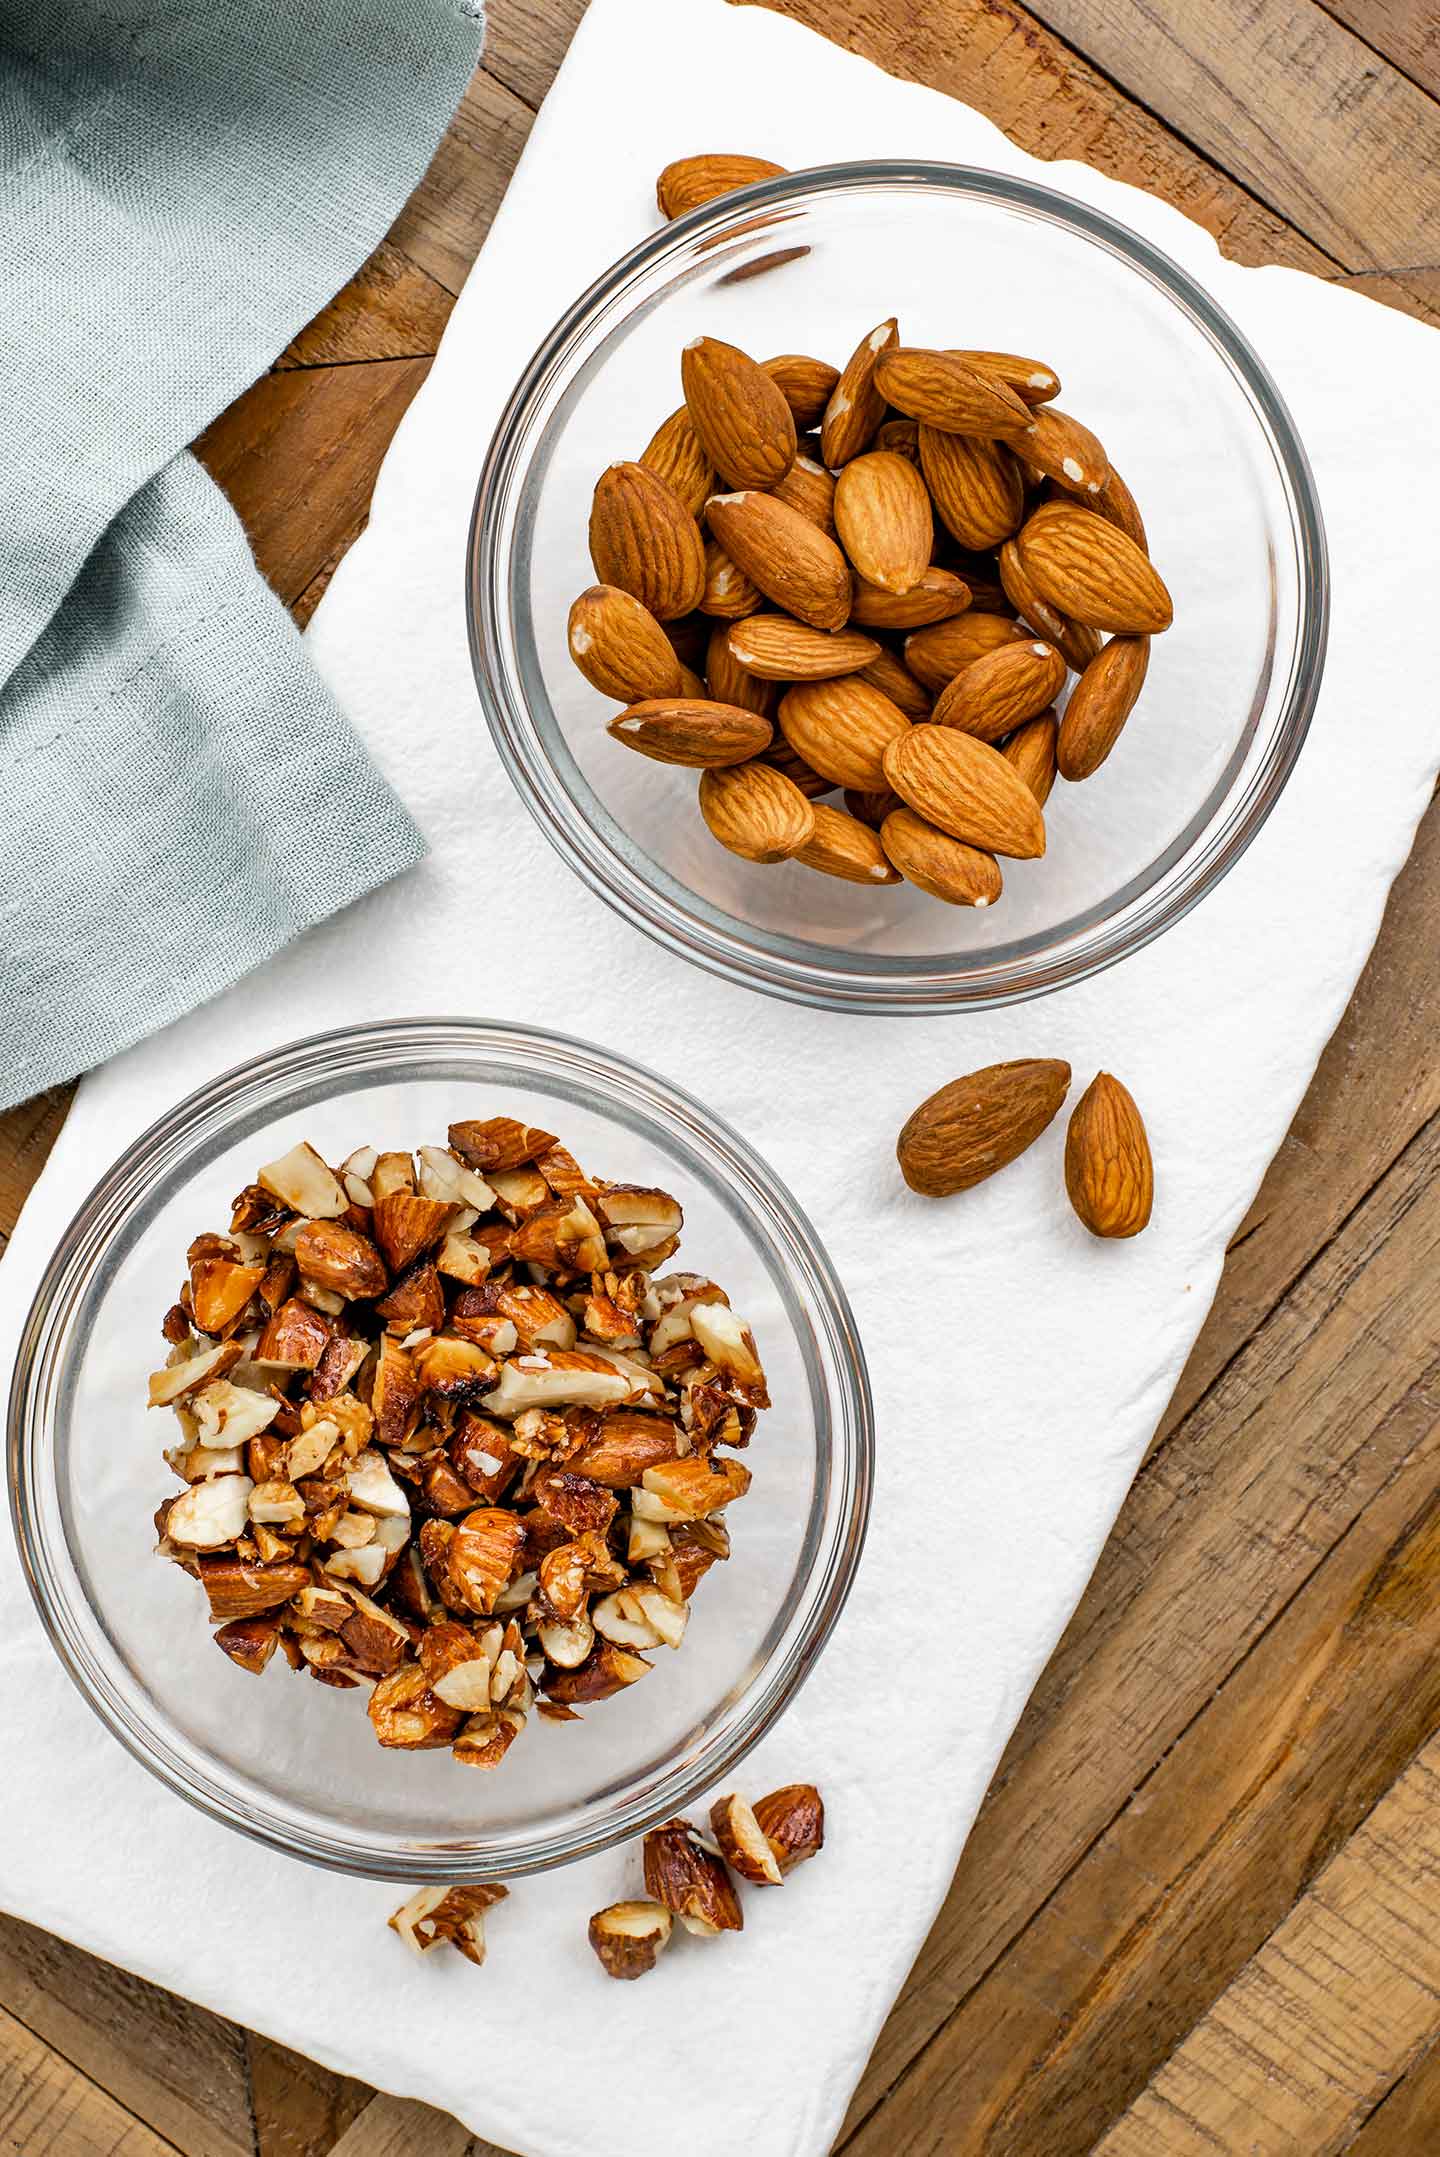 Top down view of two small bowls of almonds on a white tray. In one dish are whole raw almonds. In the other, are coarsely chopped and lightly candied toasted almonds.